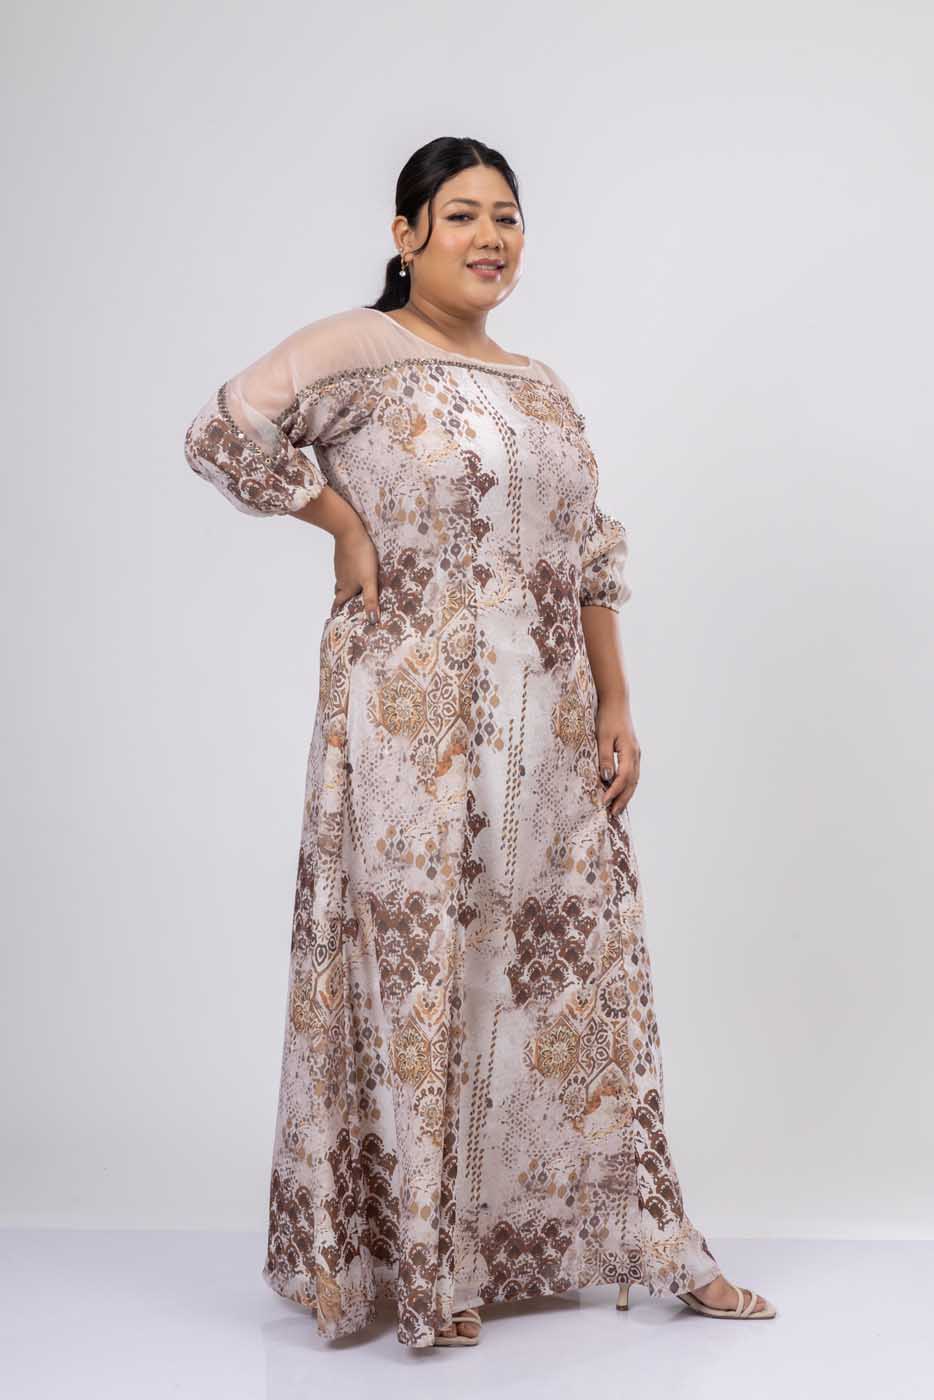 Wheatfields Boat Neck Embroidered Gown